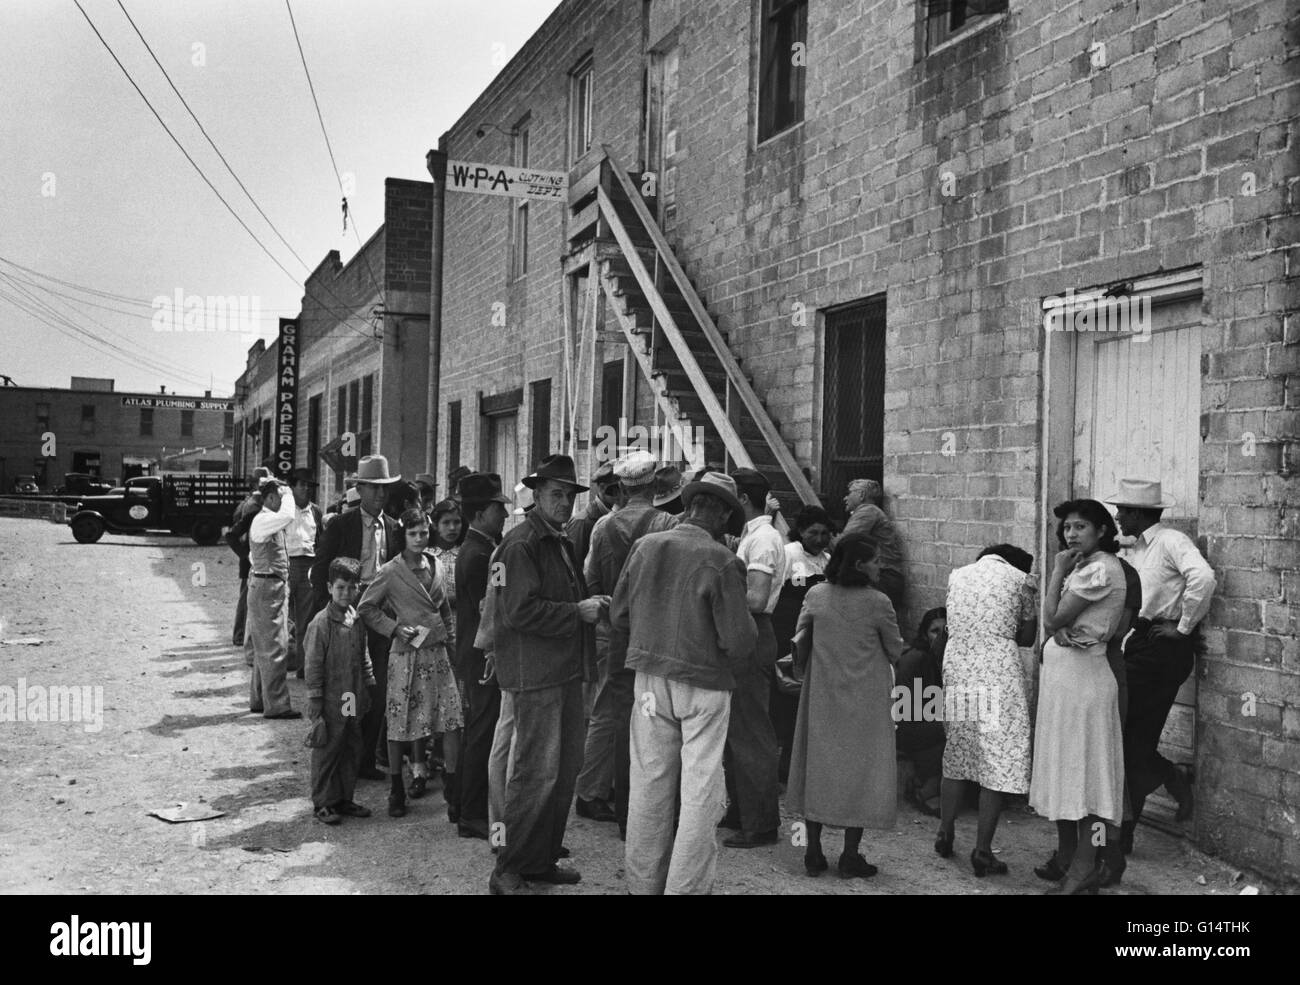 A line of people waiting for WPA clothing, San Antonio, Texas. Taken in 1939 by Russell Lee for the Farm Security Administration (FSA). Stock Photo